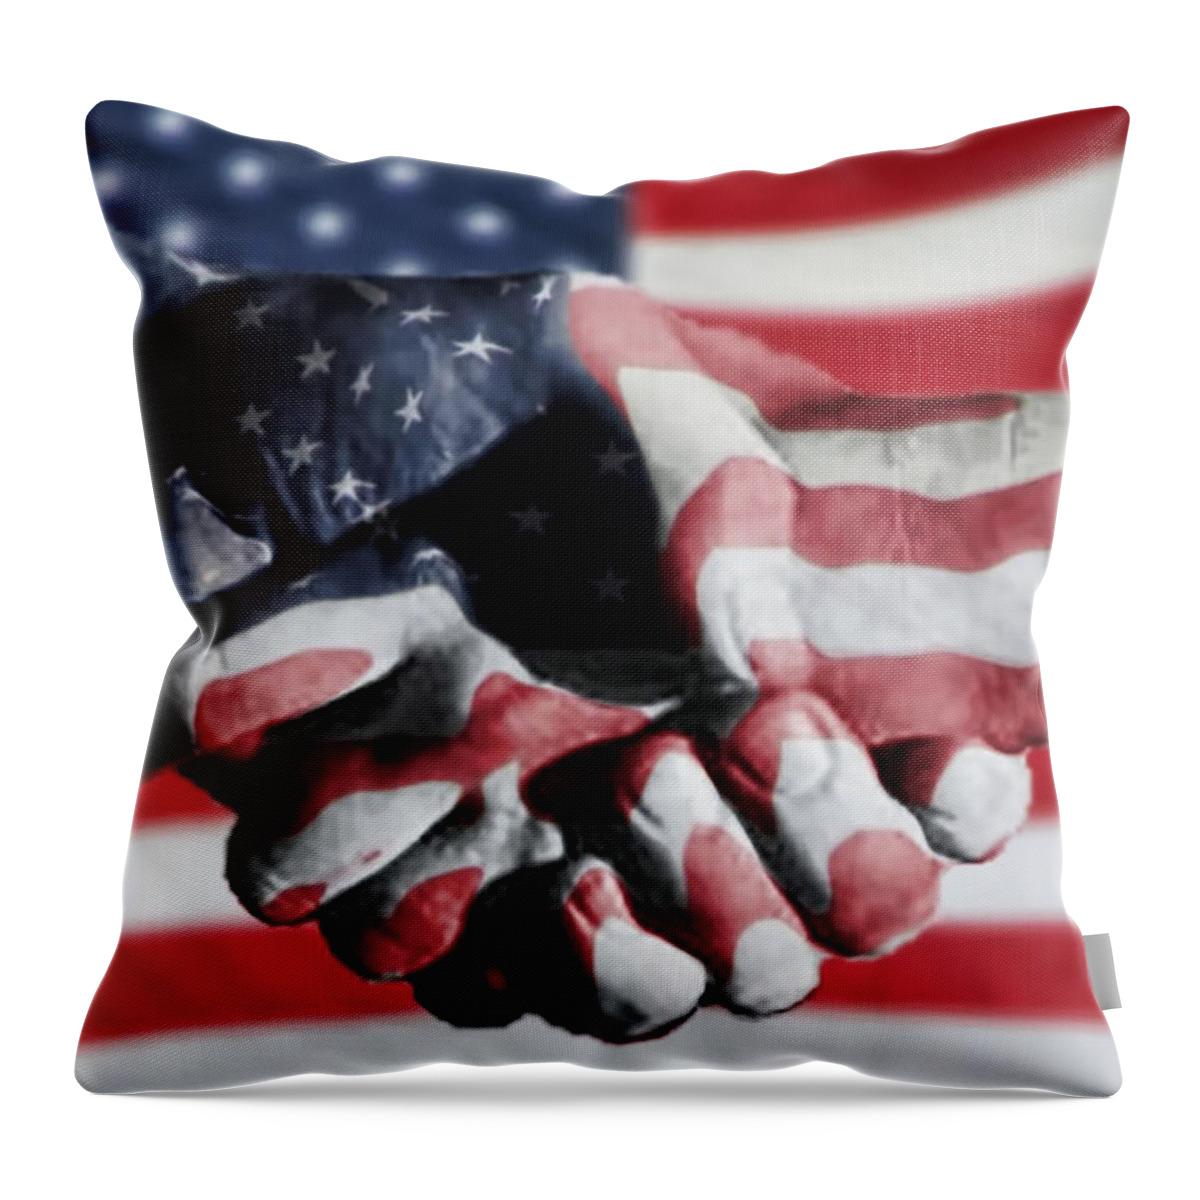 People Throw Pillow featuring the photograph Handshake Melded With American Flag by Sherry H. Bowen Photography